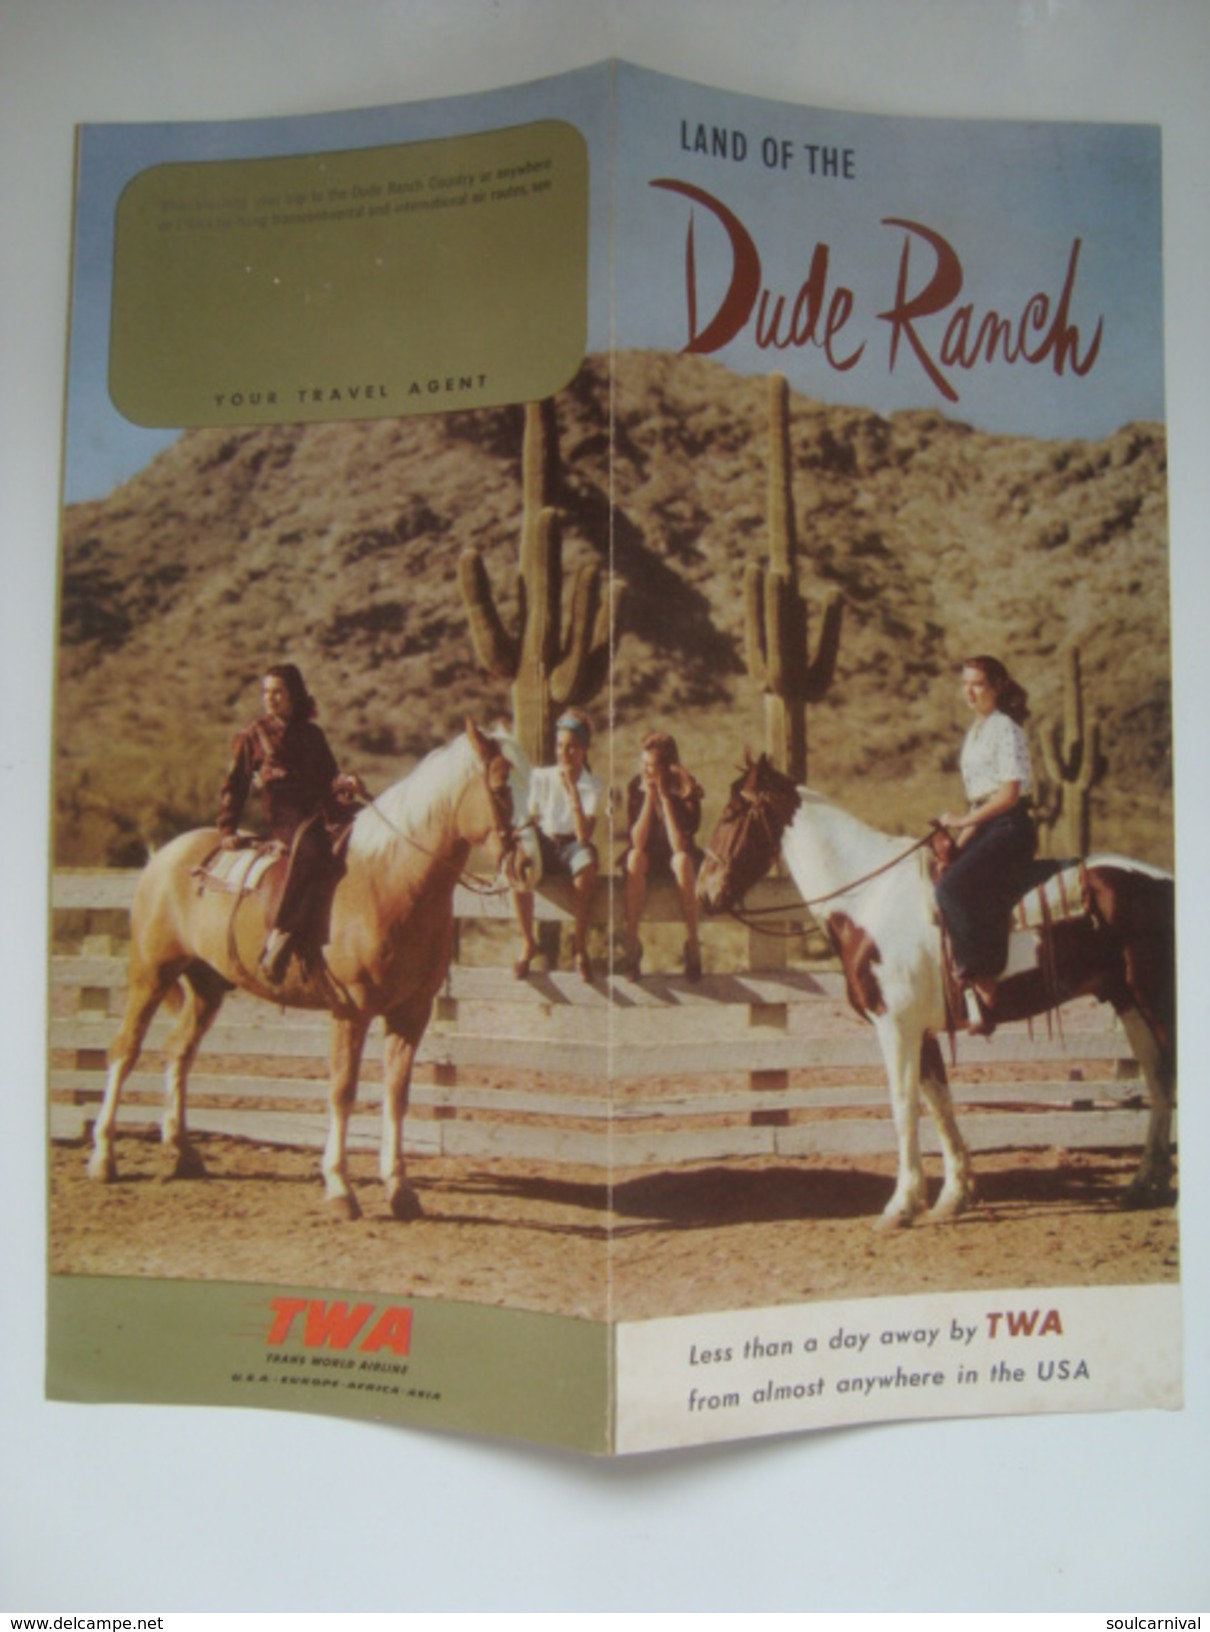 TWA. LAND OF THE DUDE RANCH - USA 50s AVIATION. 6 PAGES PAMPHLET. - Pubblicità